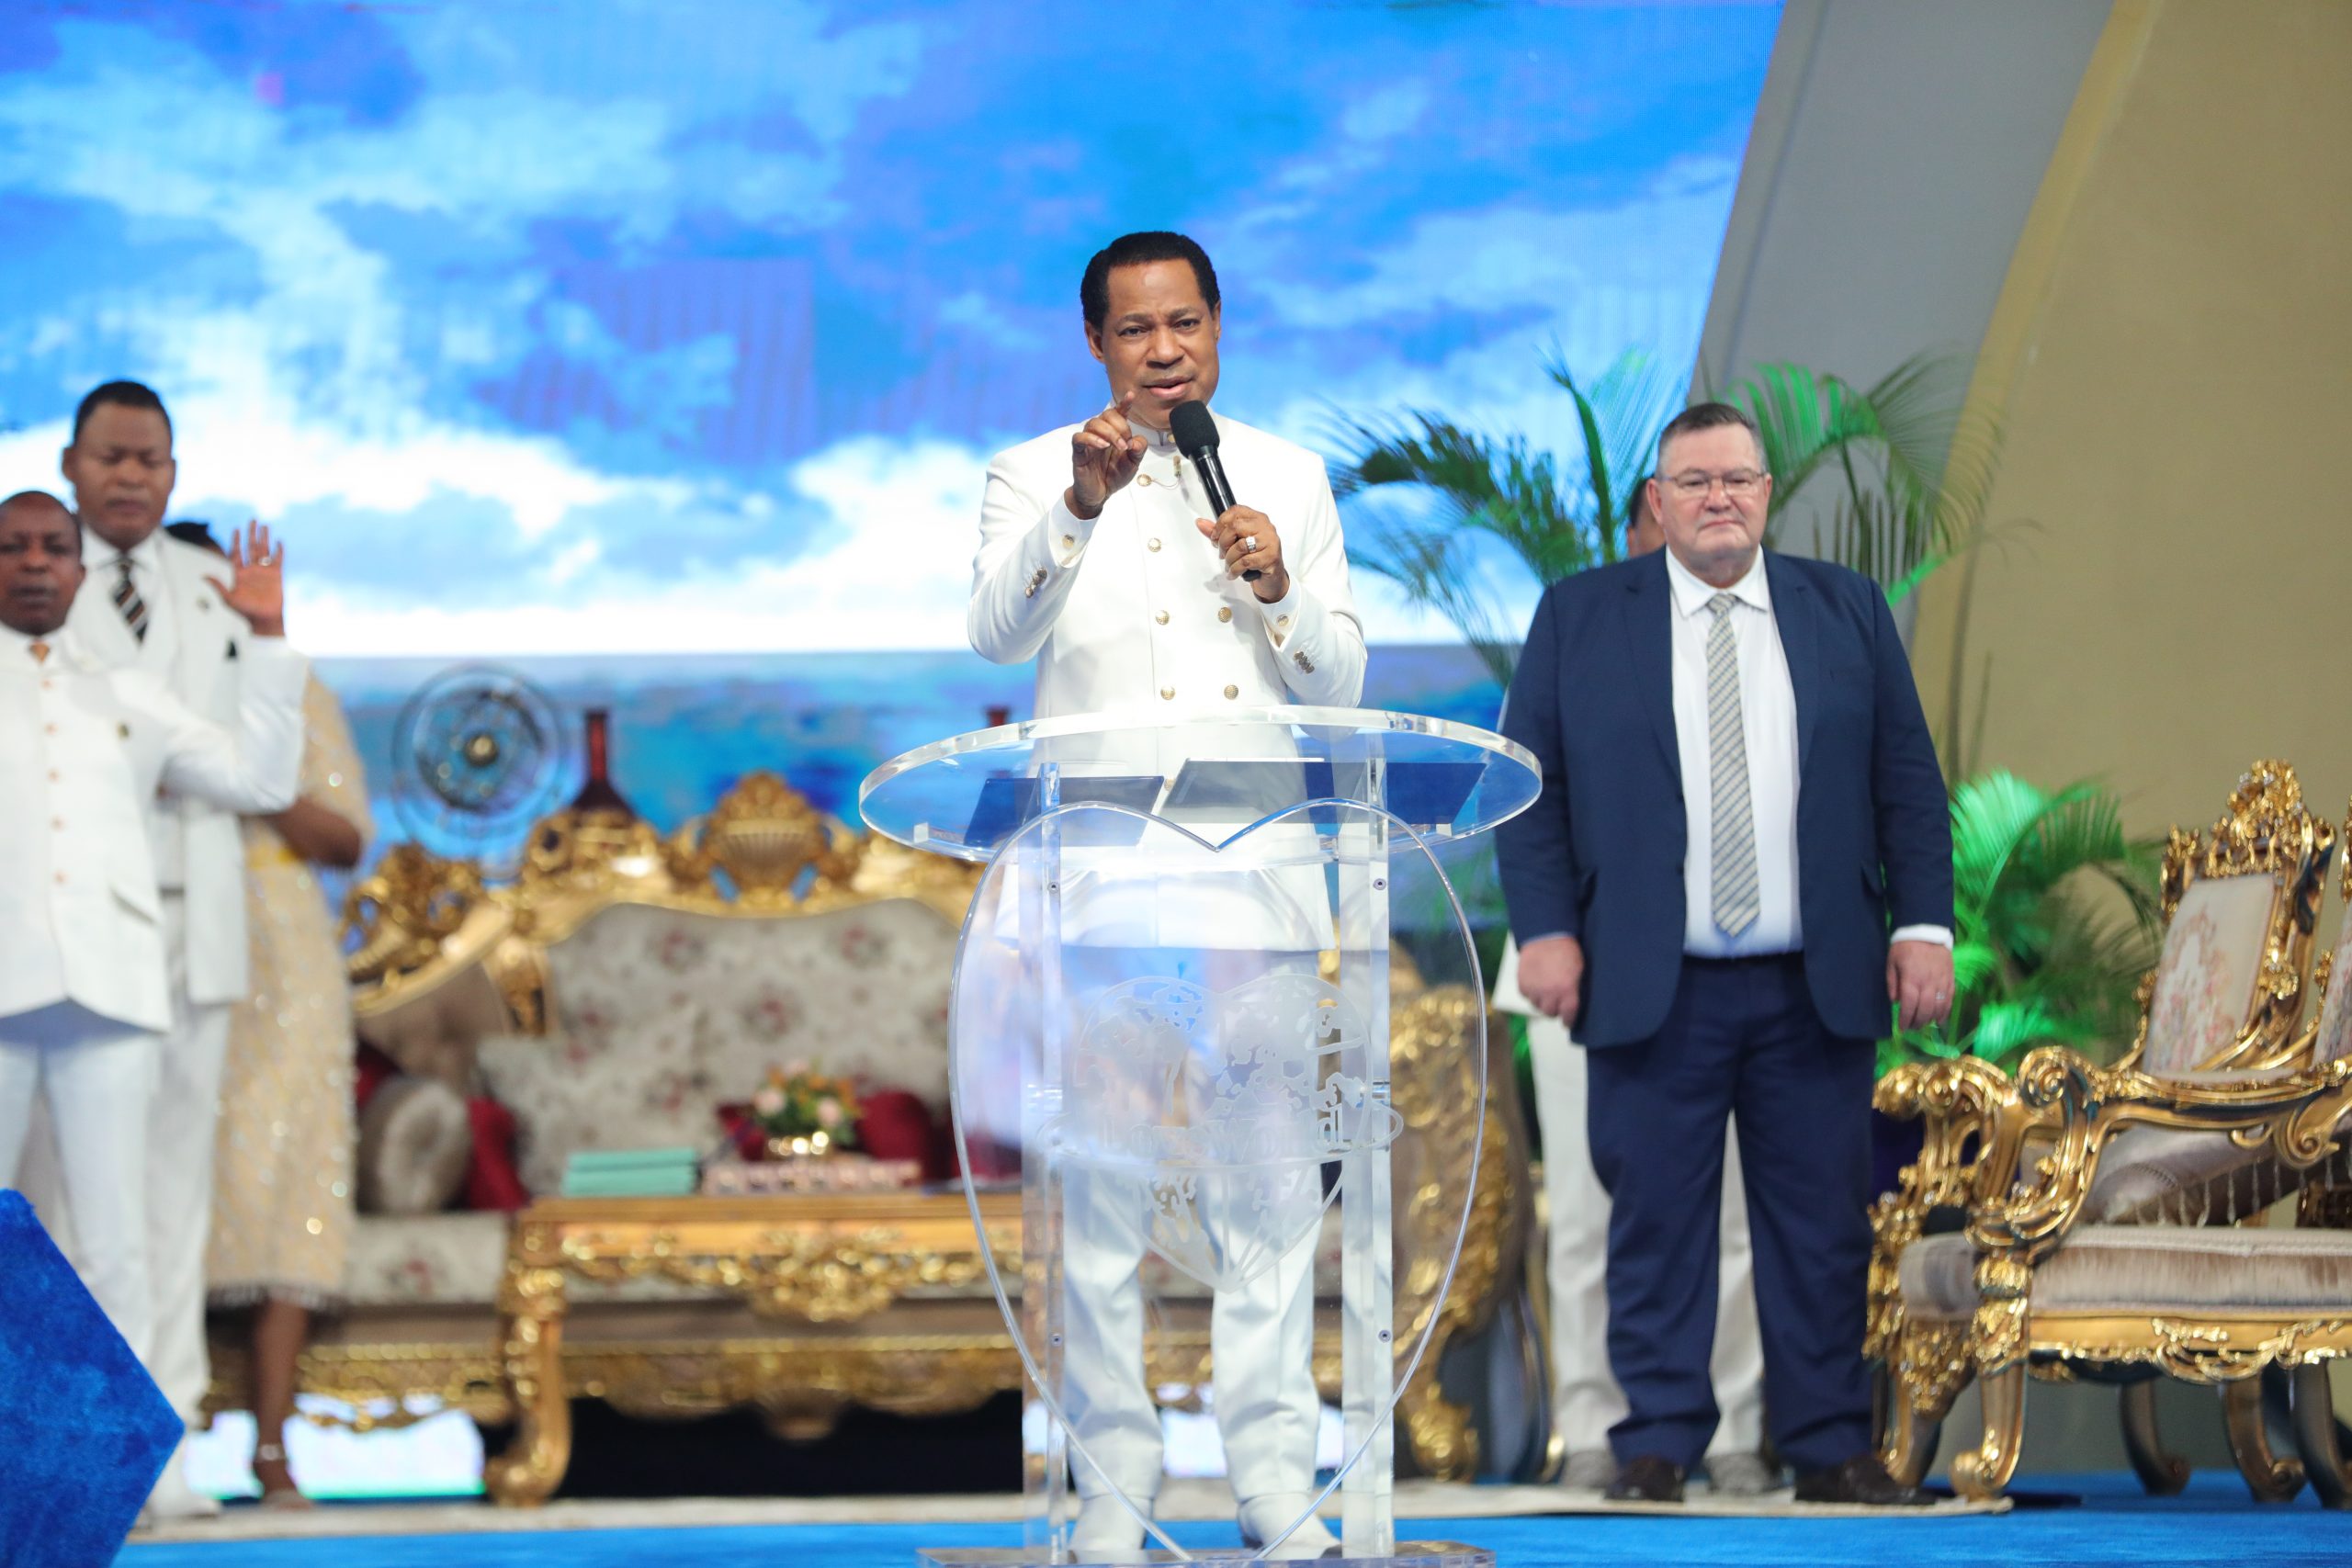 Harvest of miracles as grand finale of healing streams live healing services with Pastor Chris holds today